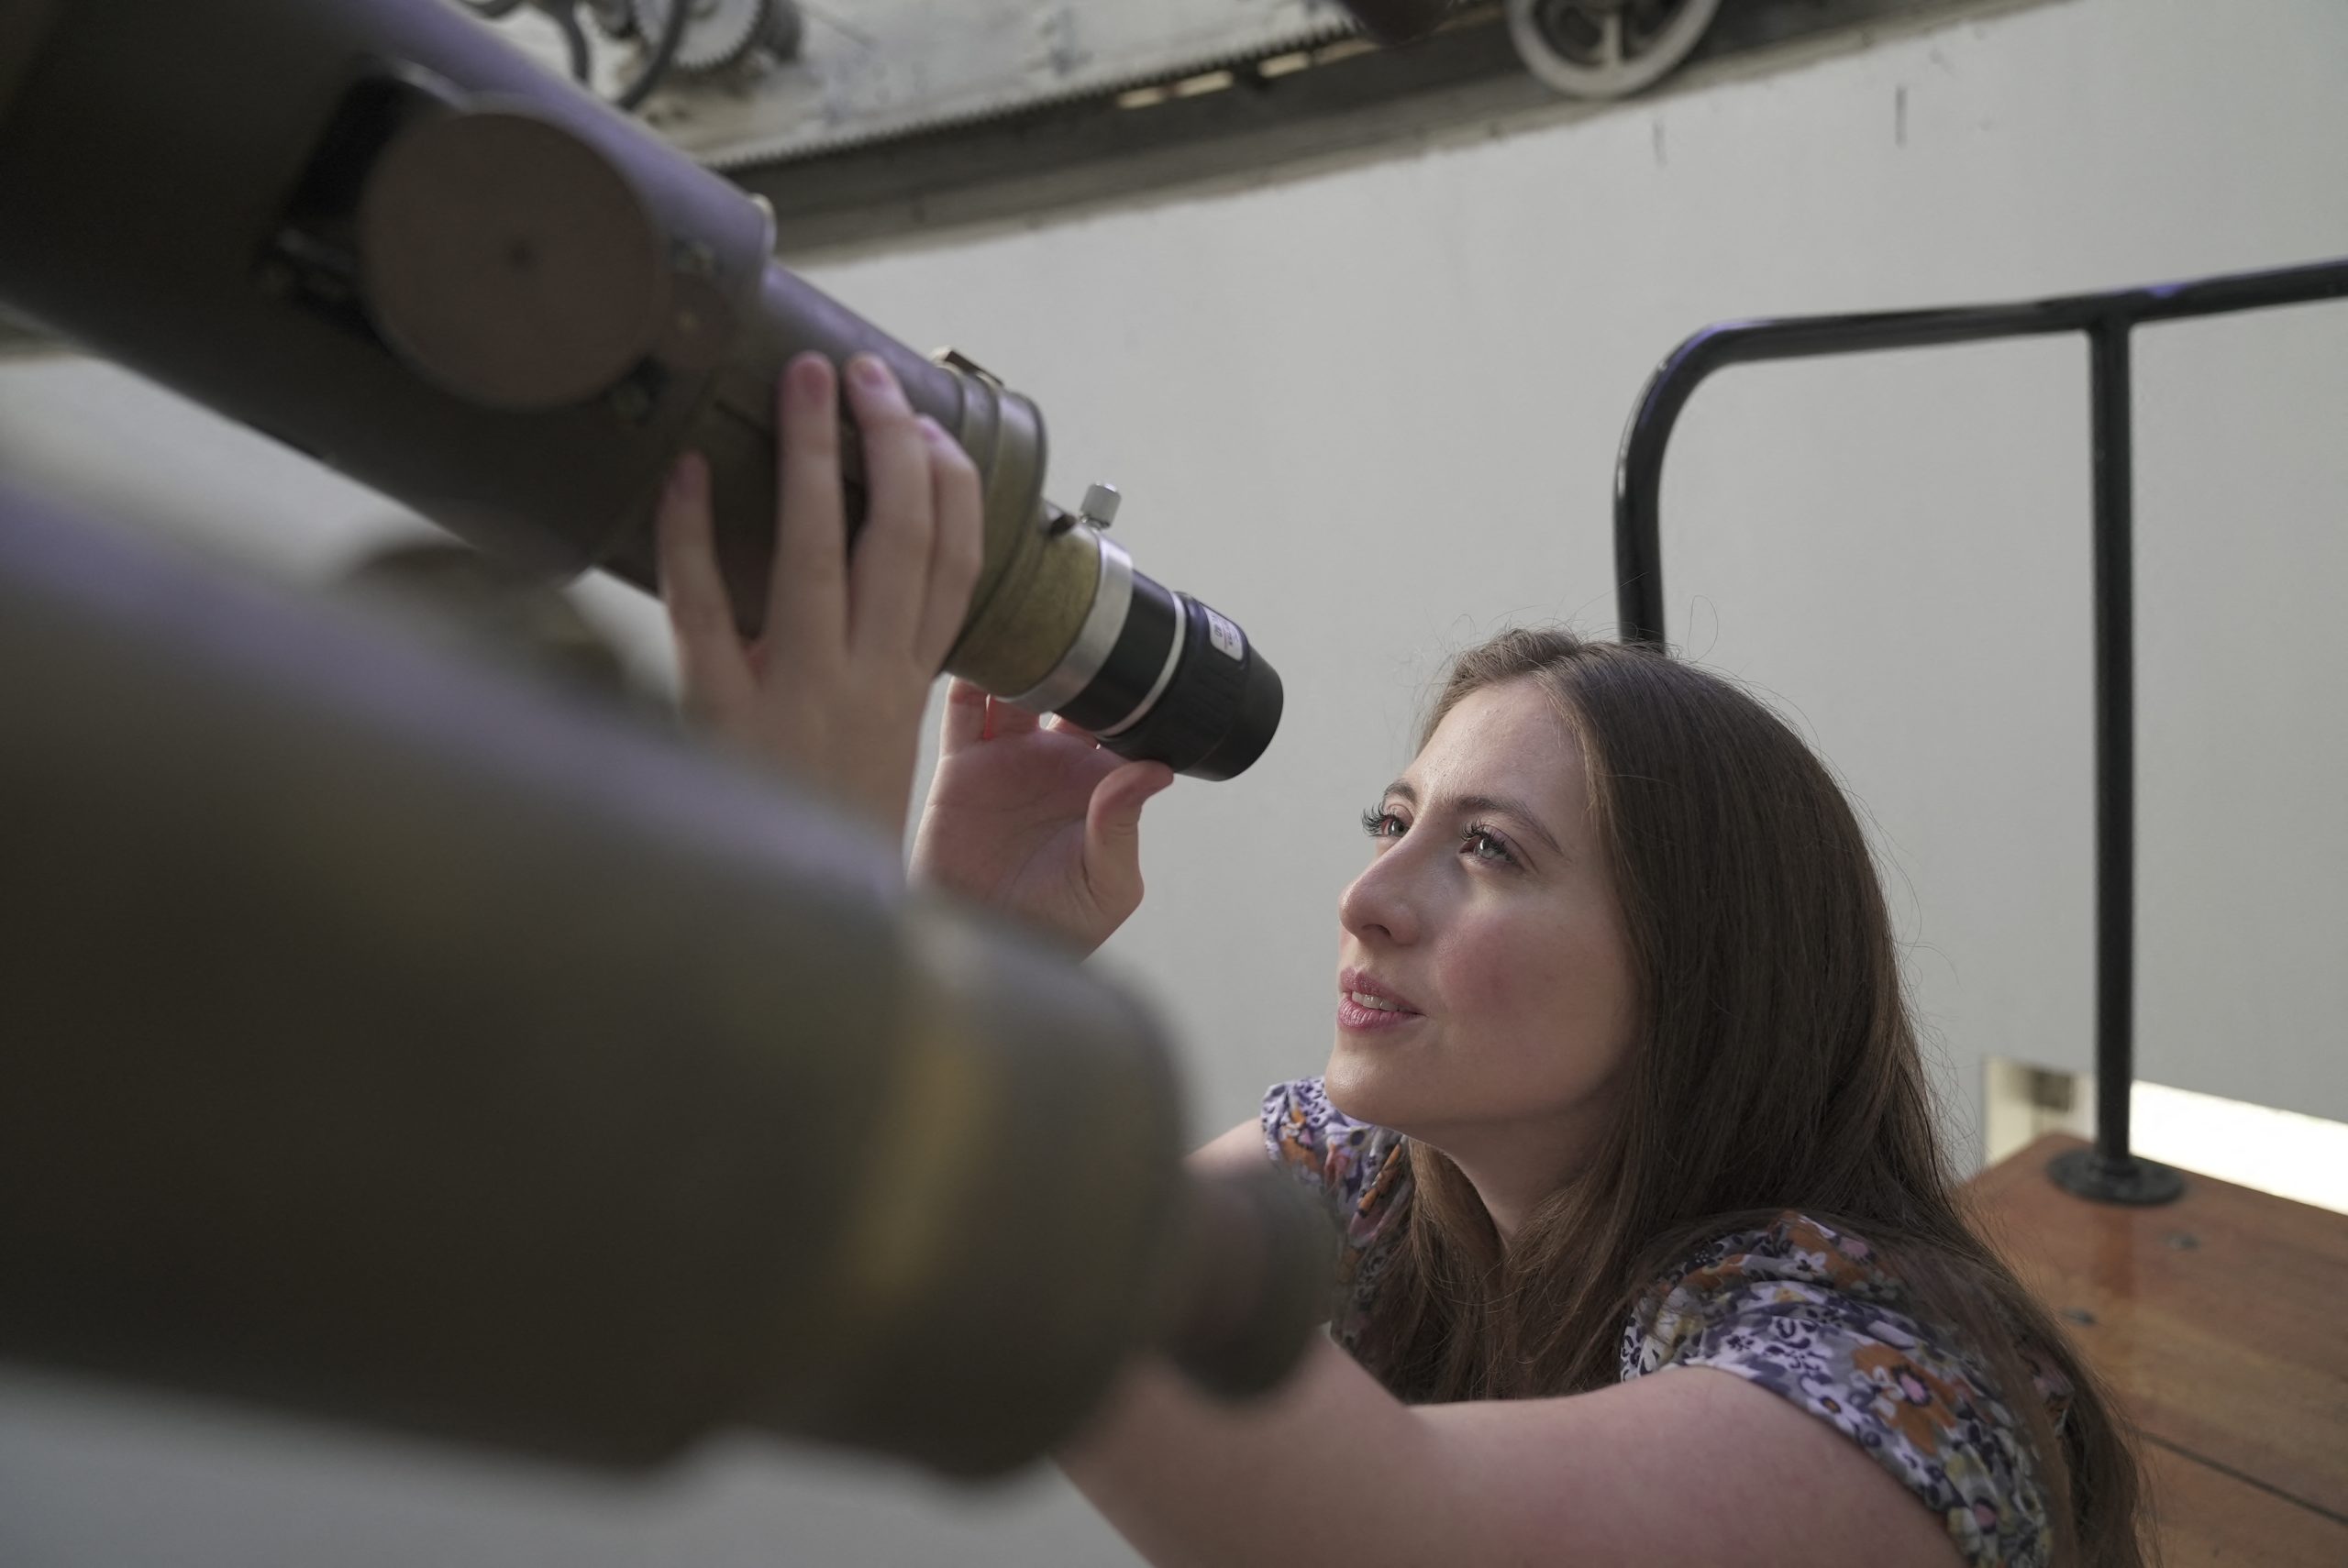 Chilean astronomer Teresa Paneque, 26, looks through a telescope at the National Astronomical Observatory of Chile in Santiago on November 16, 2023. Panaque is one of Chile's youngest astronomers and science communicators, encouraging girls to get involved in the study of the stars in South America's most advanced country in the field. (Photo by Pablo COZZAGLIO / AFP)